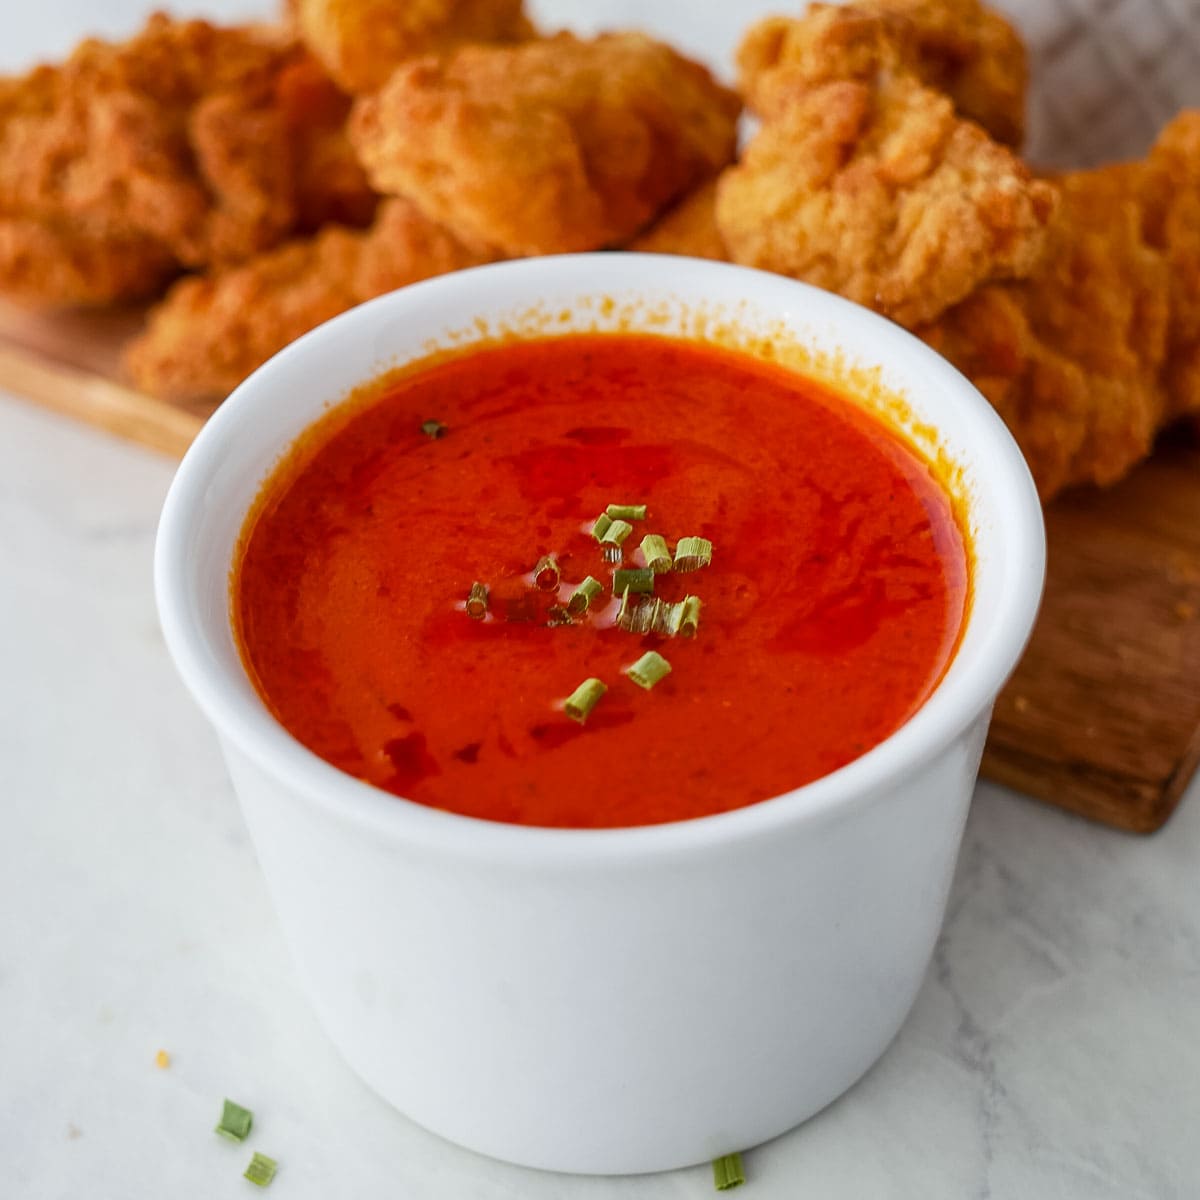 A bowl of buffalo sauce with fried chicken on a cutting board.